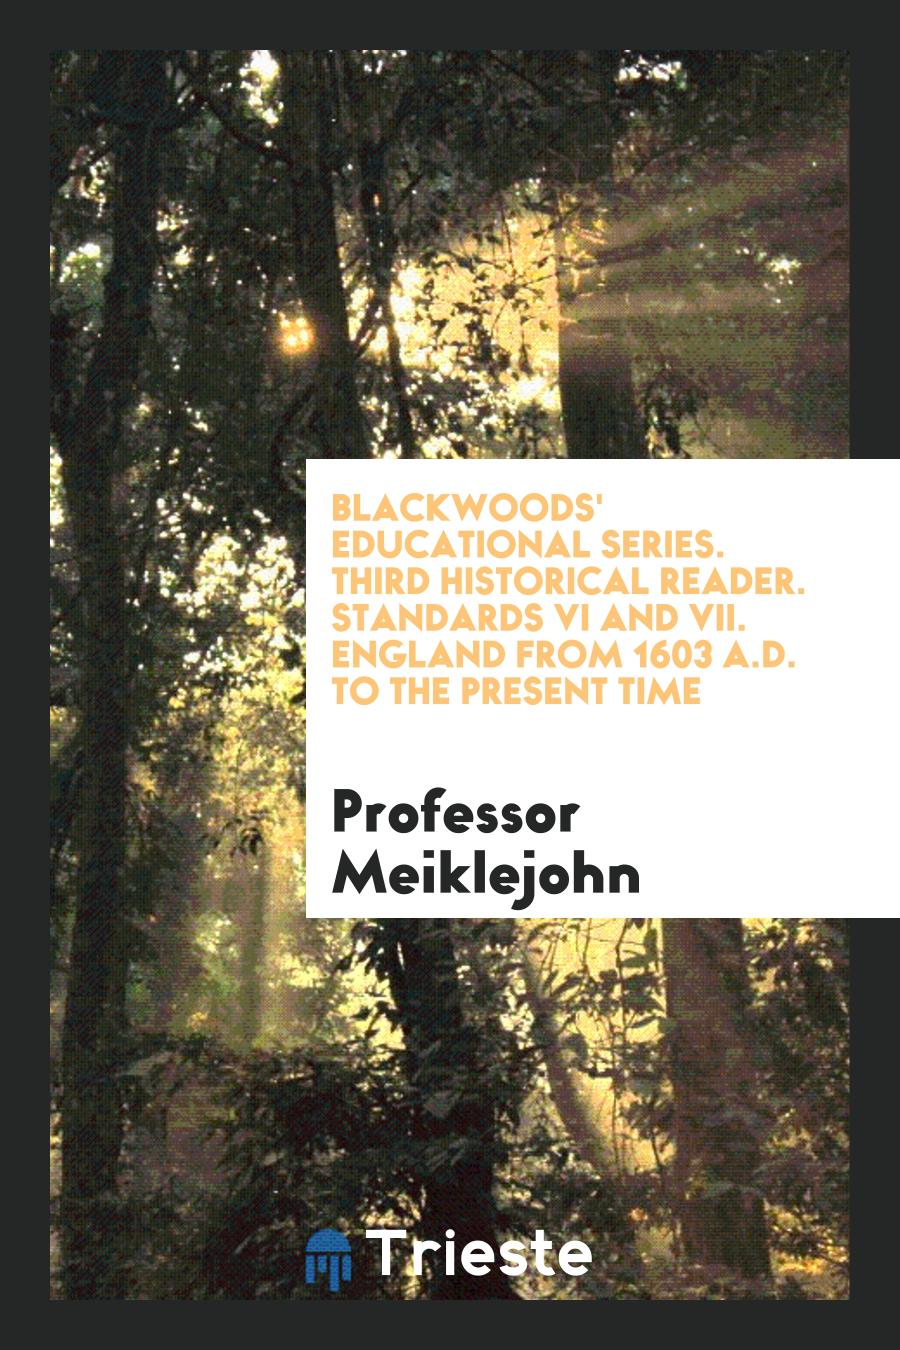 Blackwoods' Educational Series. Third Historical Reader. Standards VI and VII. England from 1603 A.D. to the Present Time